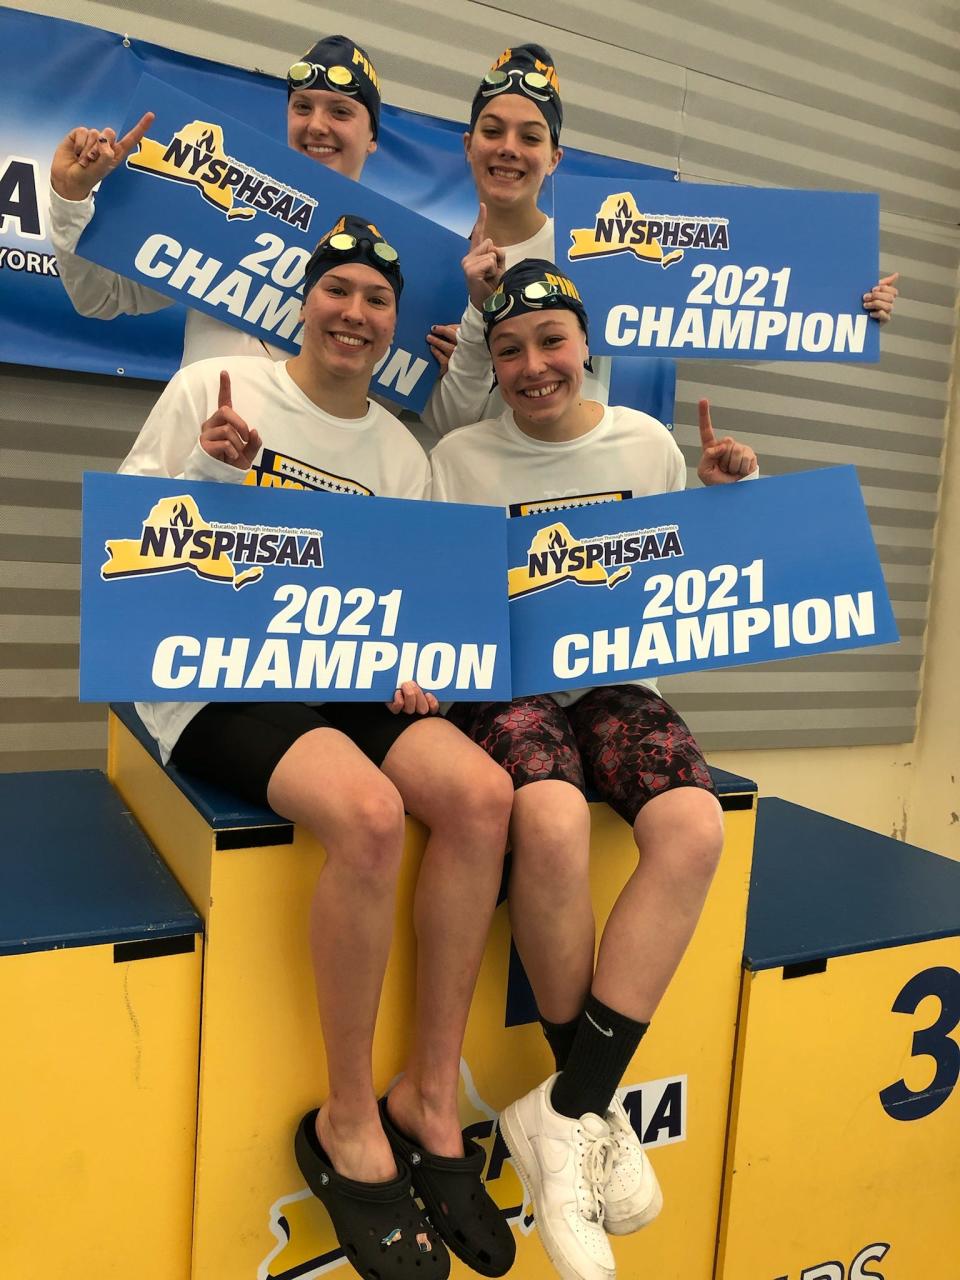 Elishka Hajek, Samantha McKee, Cora Mance and Mackenzie Gula hold up championship signs after winning the 200-yard freestyle relay at the 2021 NYSPHSAA Swimming & Diving Championships and breaking a Section 9 record. McKee and Gula are back for the 2023 finals. KATHY GALLAGHER